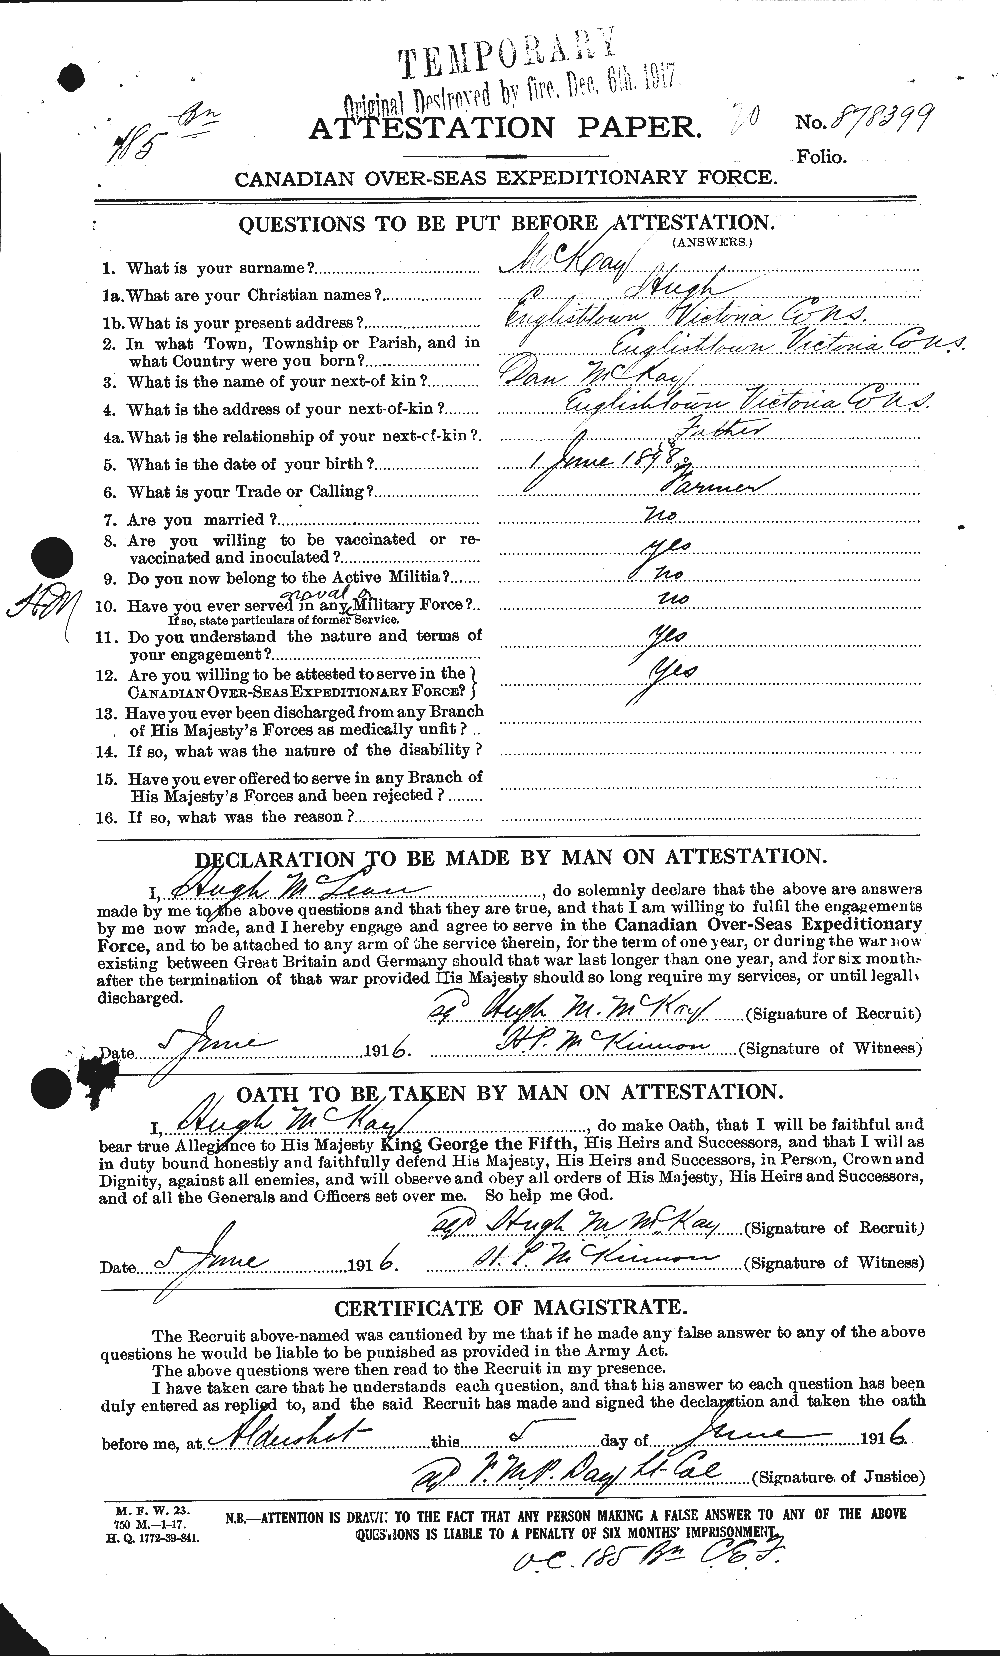 Personnel Records of the First World War - CEF 534760a